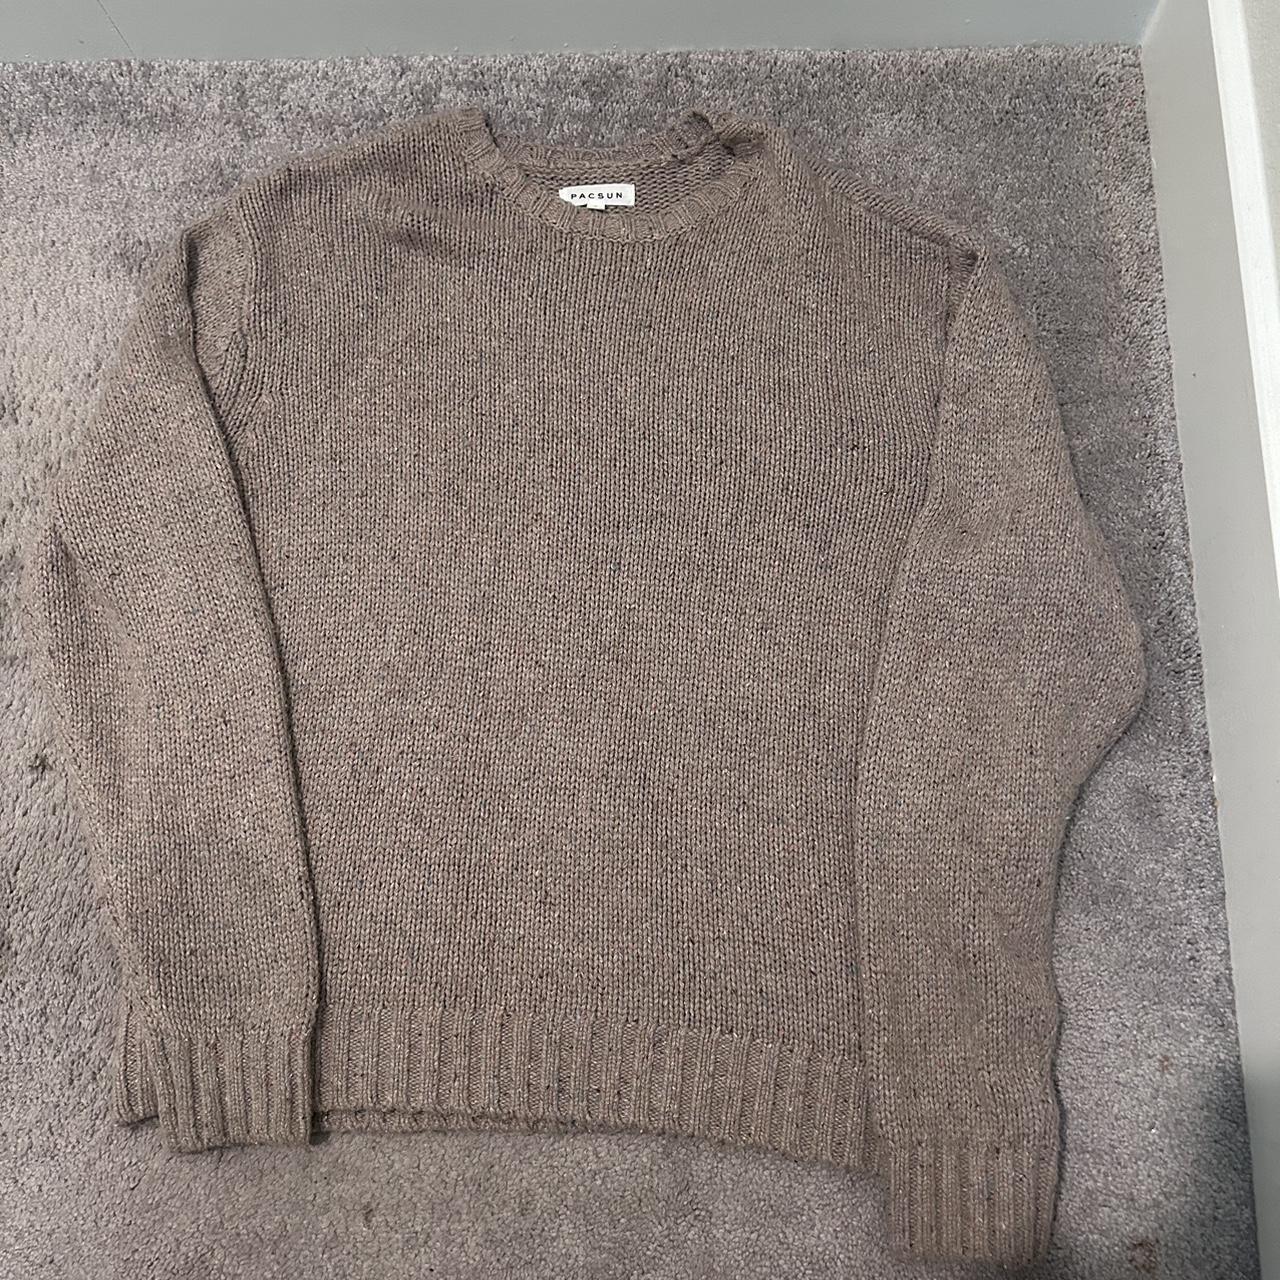 Pacsun Thermal Wool Sweater (Heavy) In Excellent... - Depop